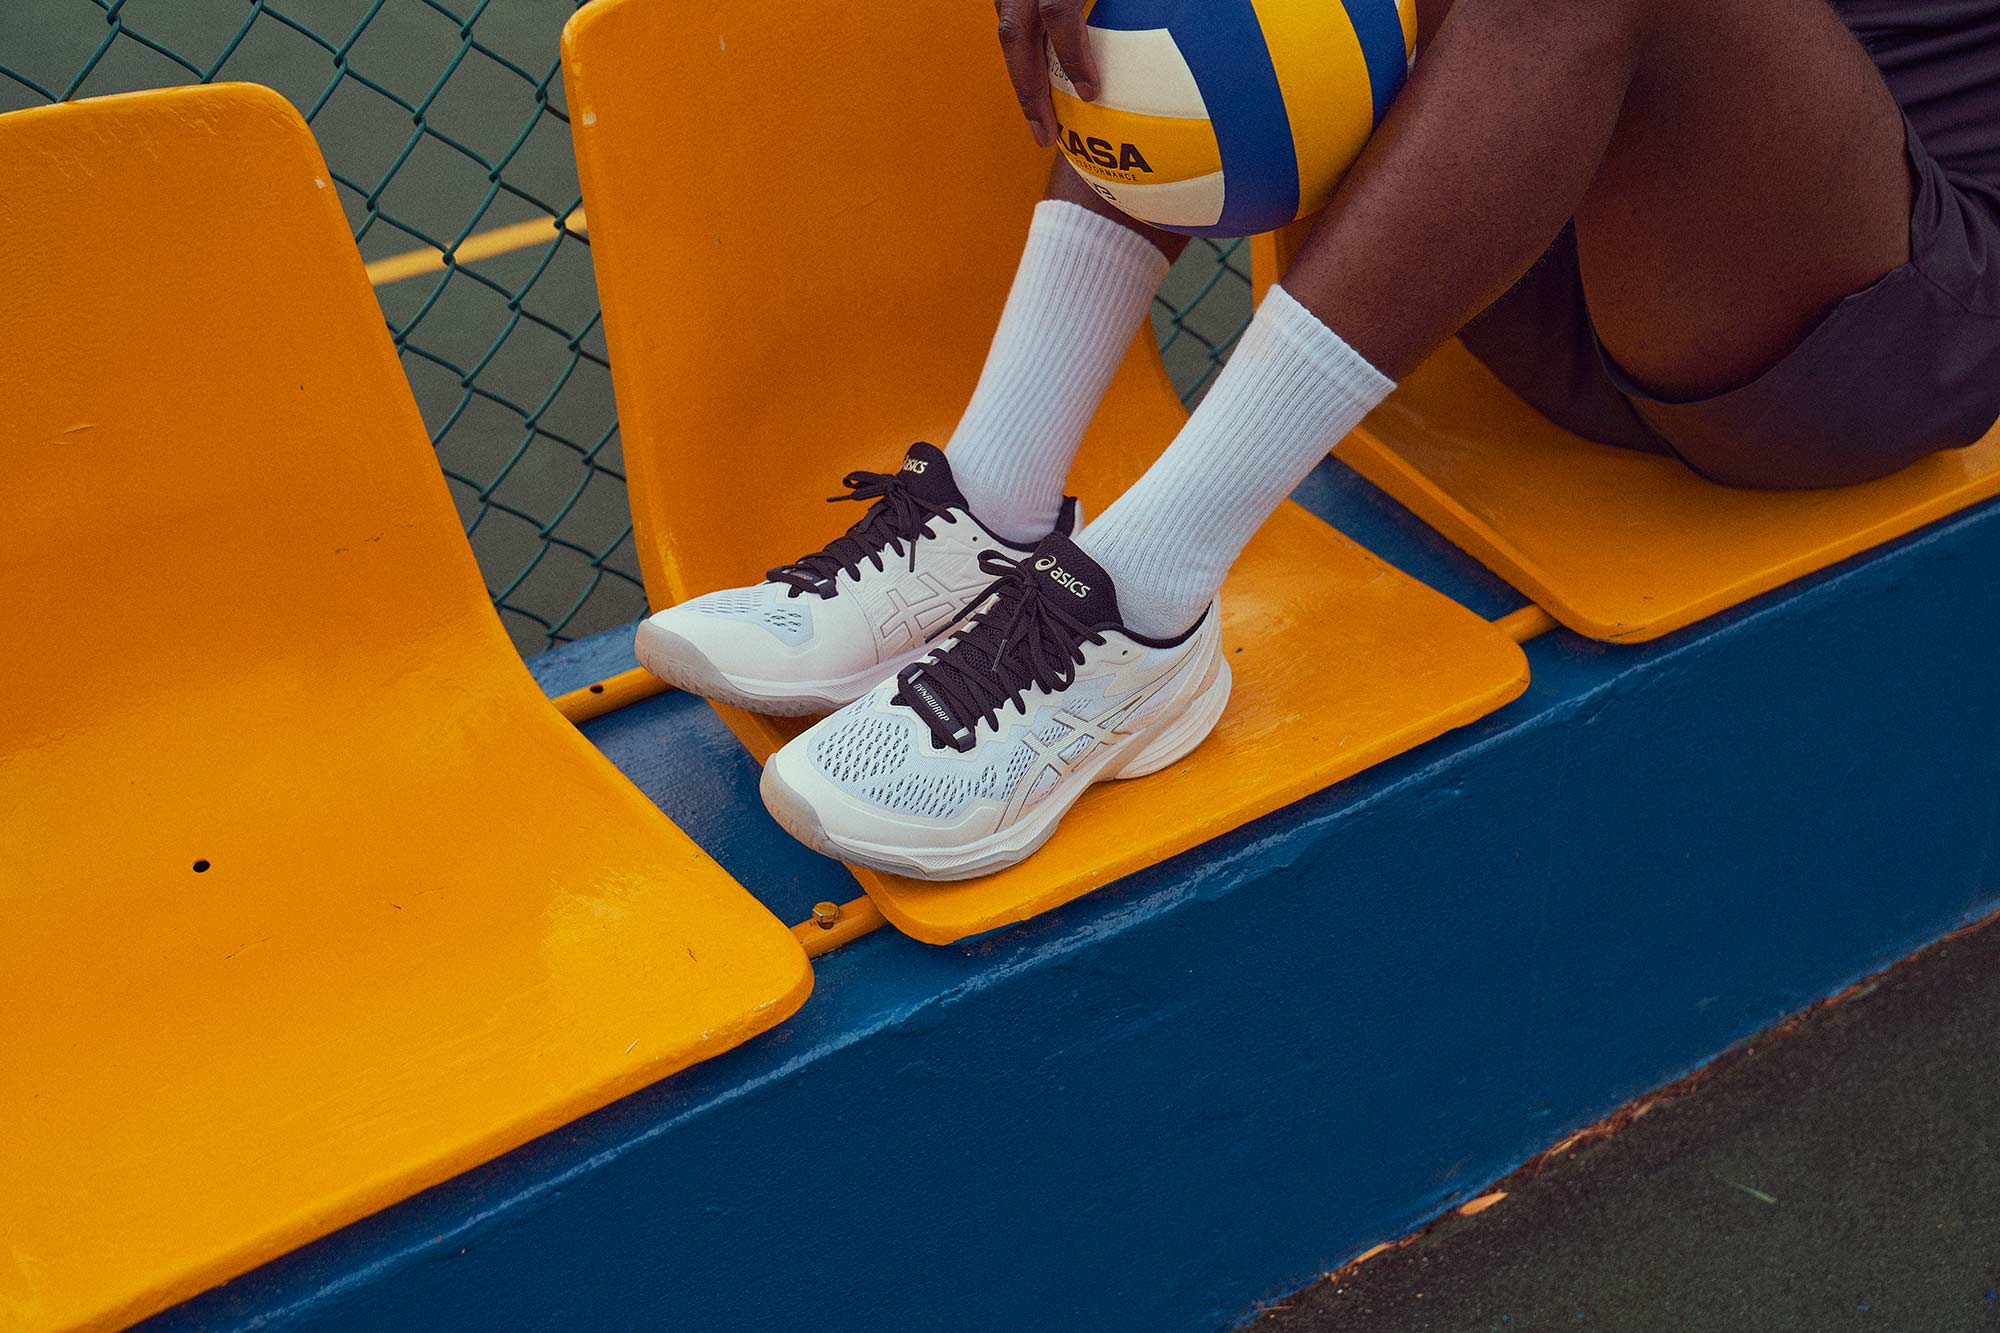 Close-up shot of ASICS Volleyball shoes, photographed for ASICS Europe on yellow chairs